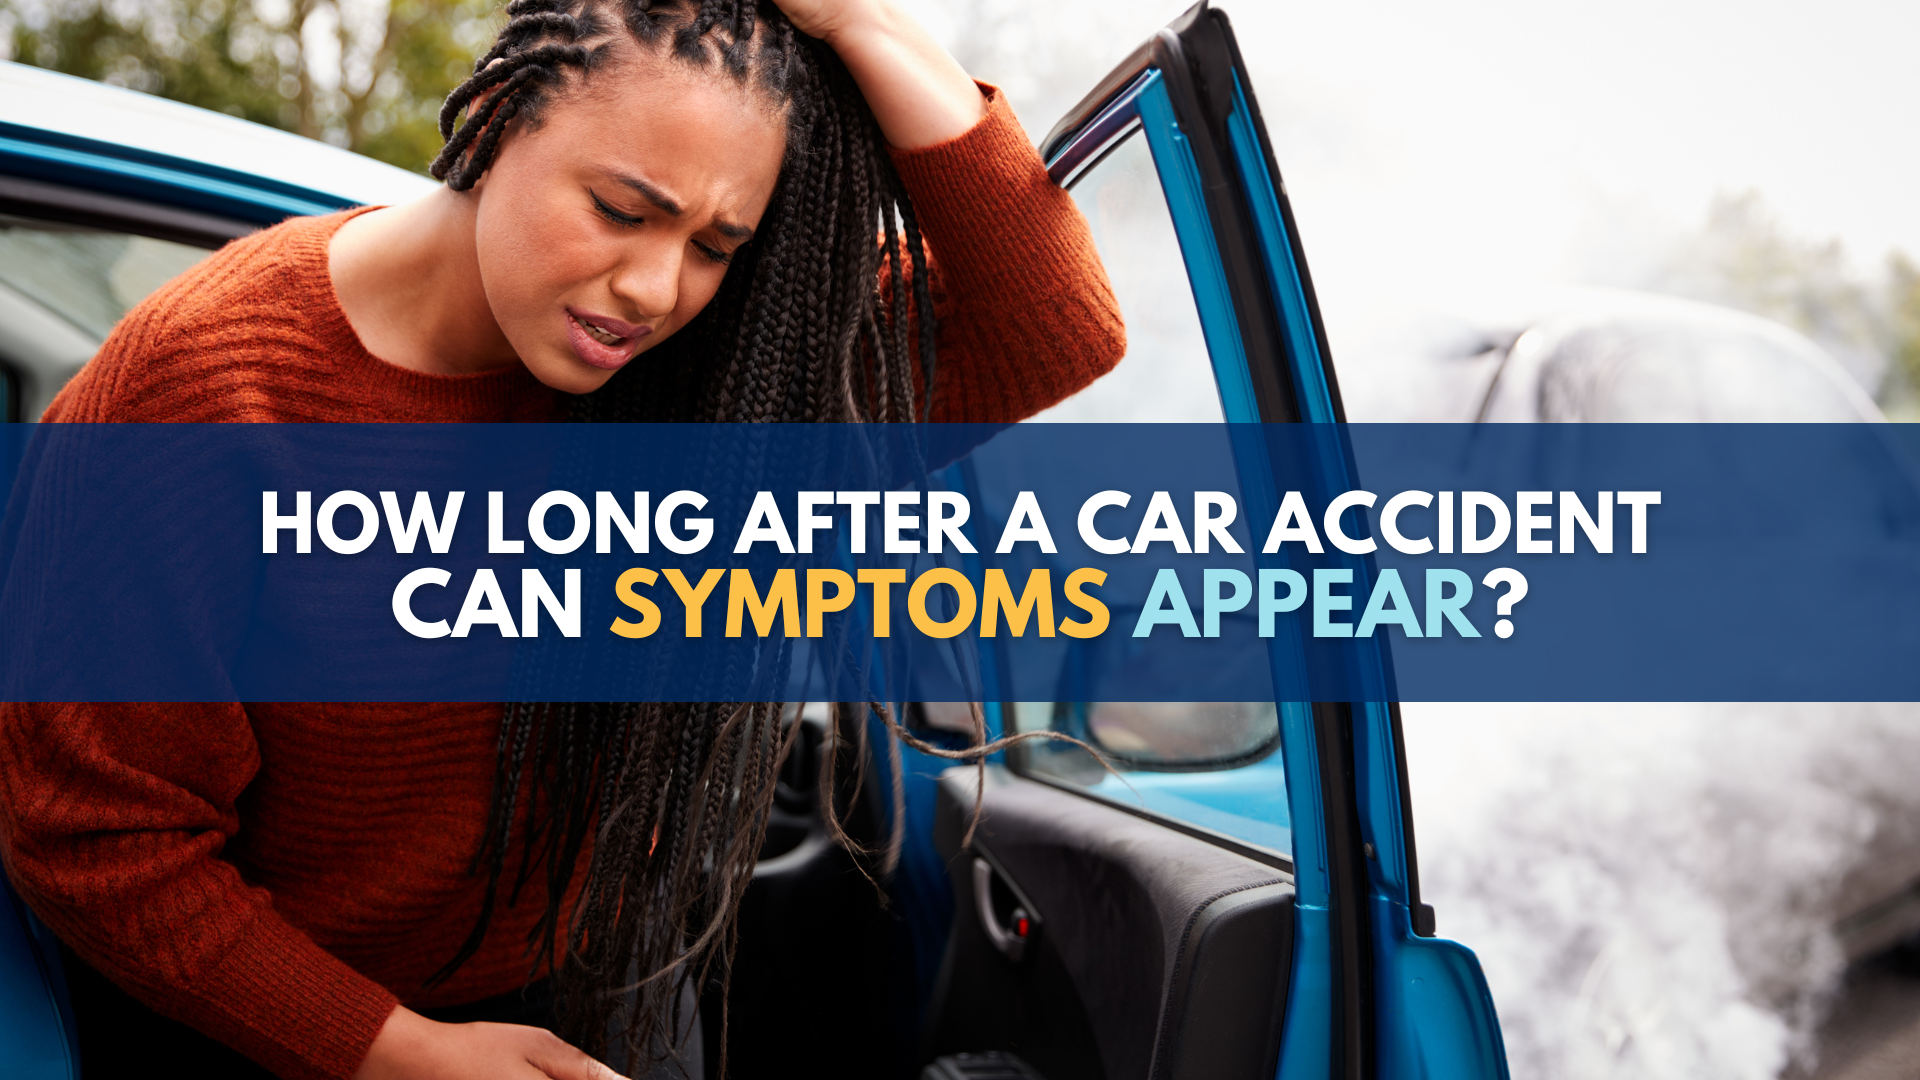 How long after a car accident can symptoms appear?